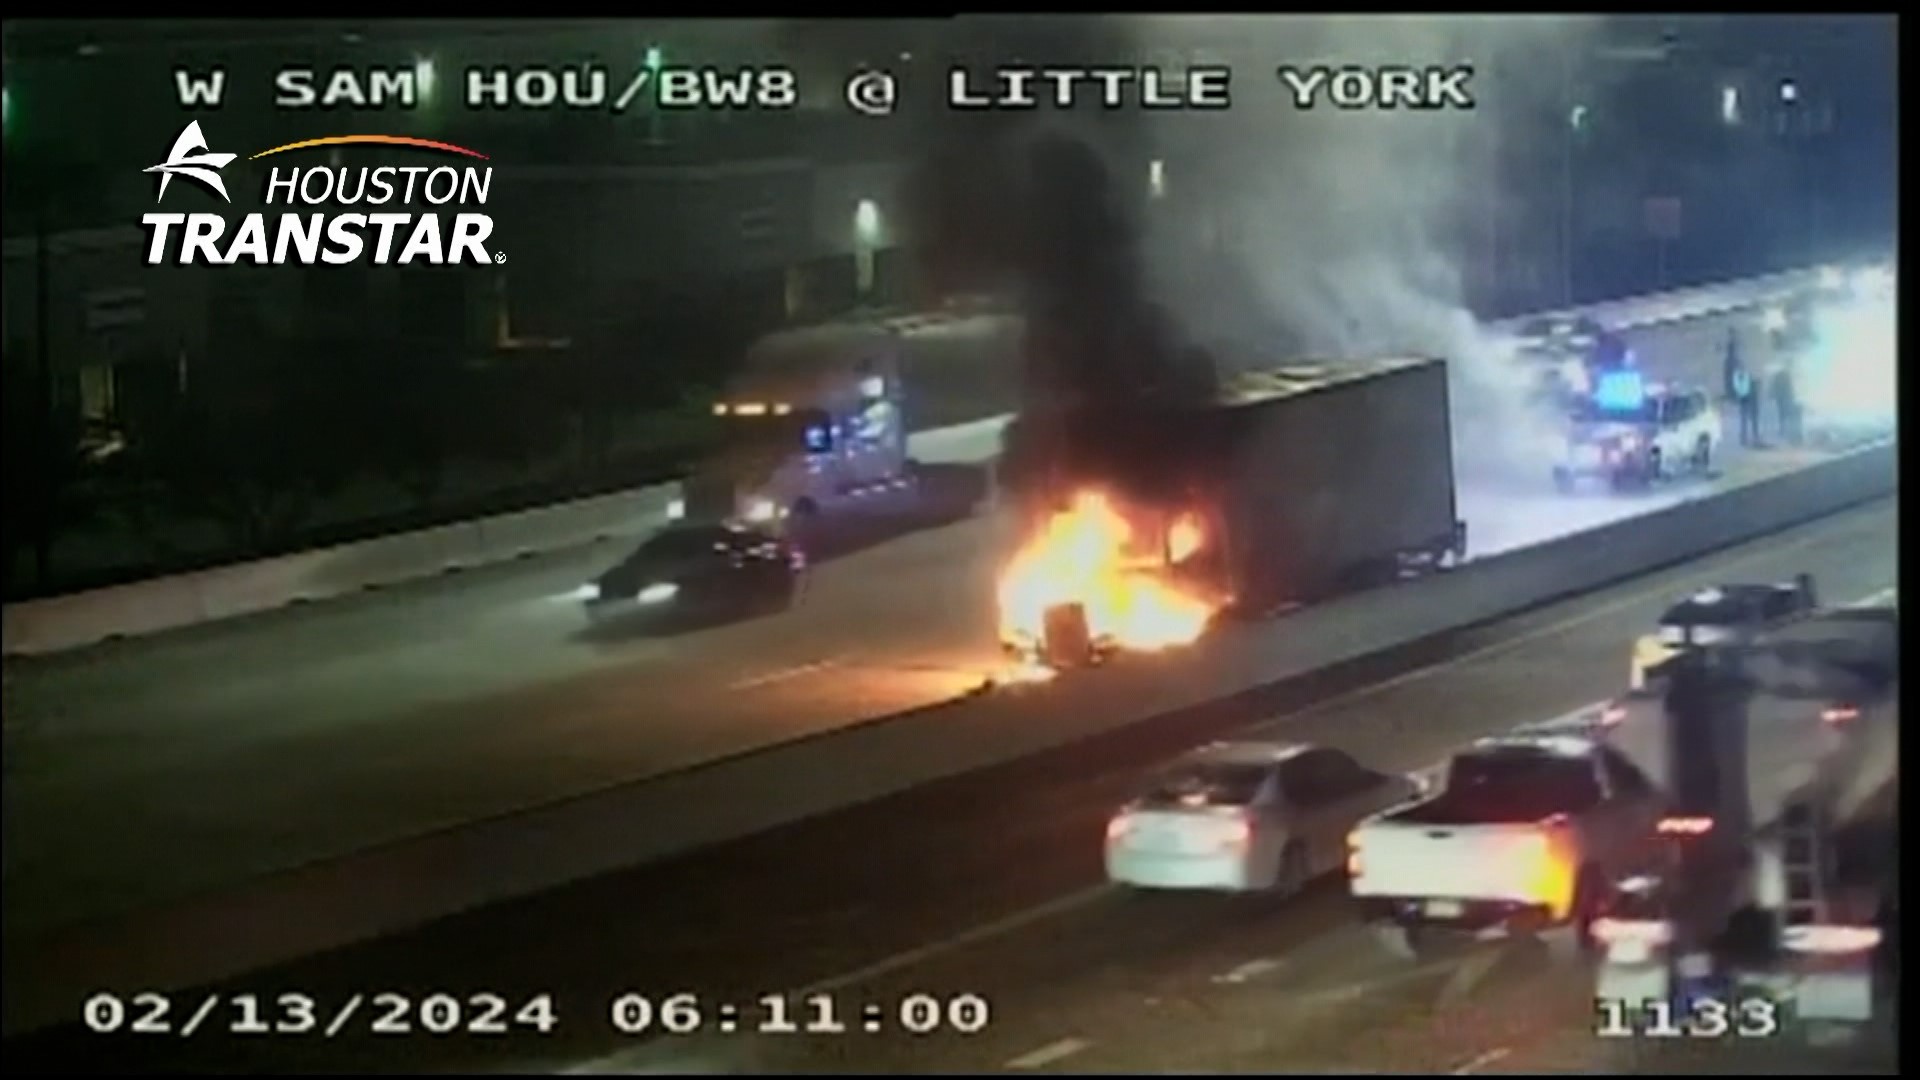 Flames could be seen spewing out of the truck from Houston TranStar cameras.